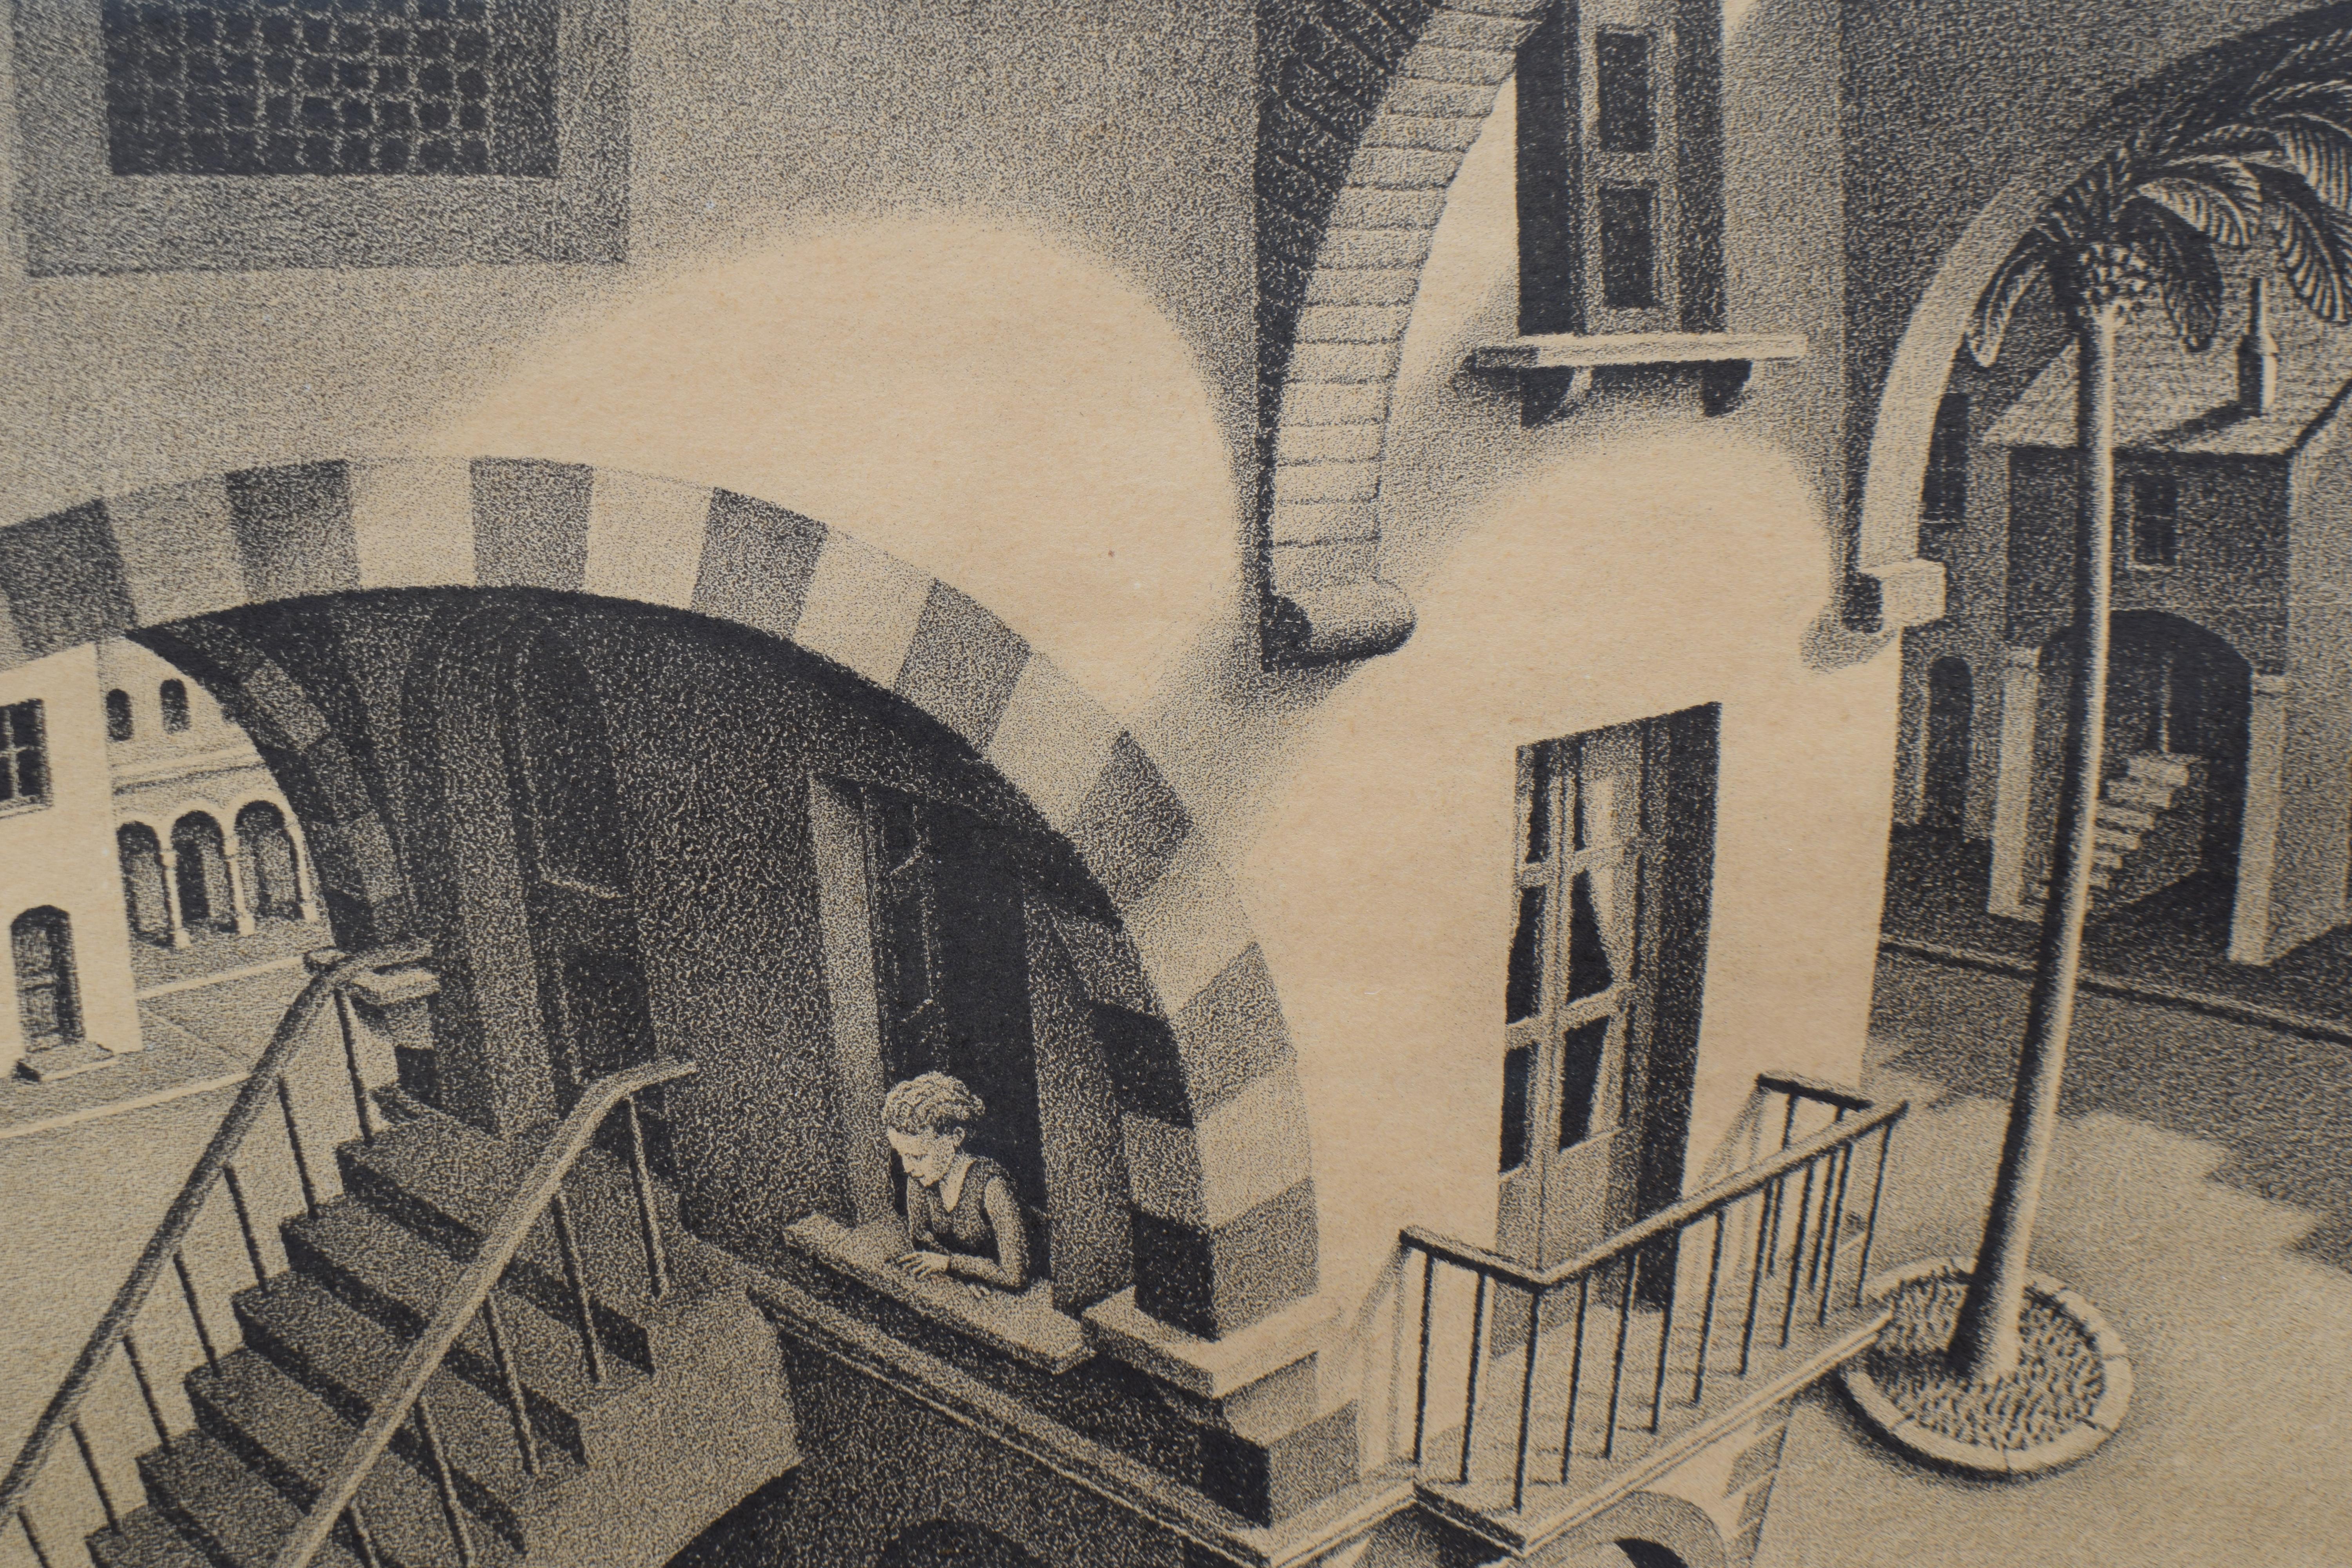 Up and Down - Dutch Artist Litho Metamorphoses Perspective Architecture - Print by M.C. Escher